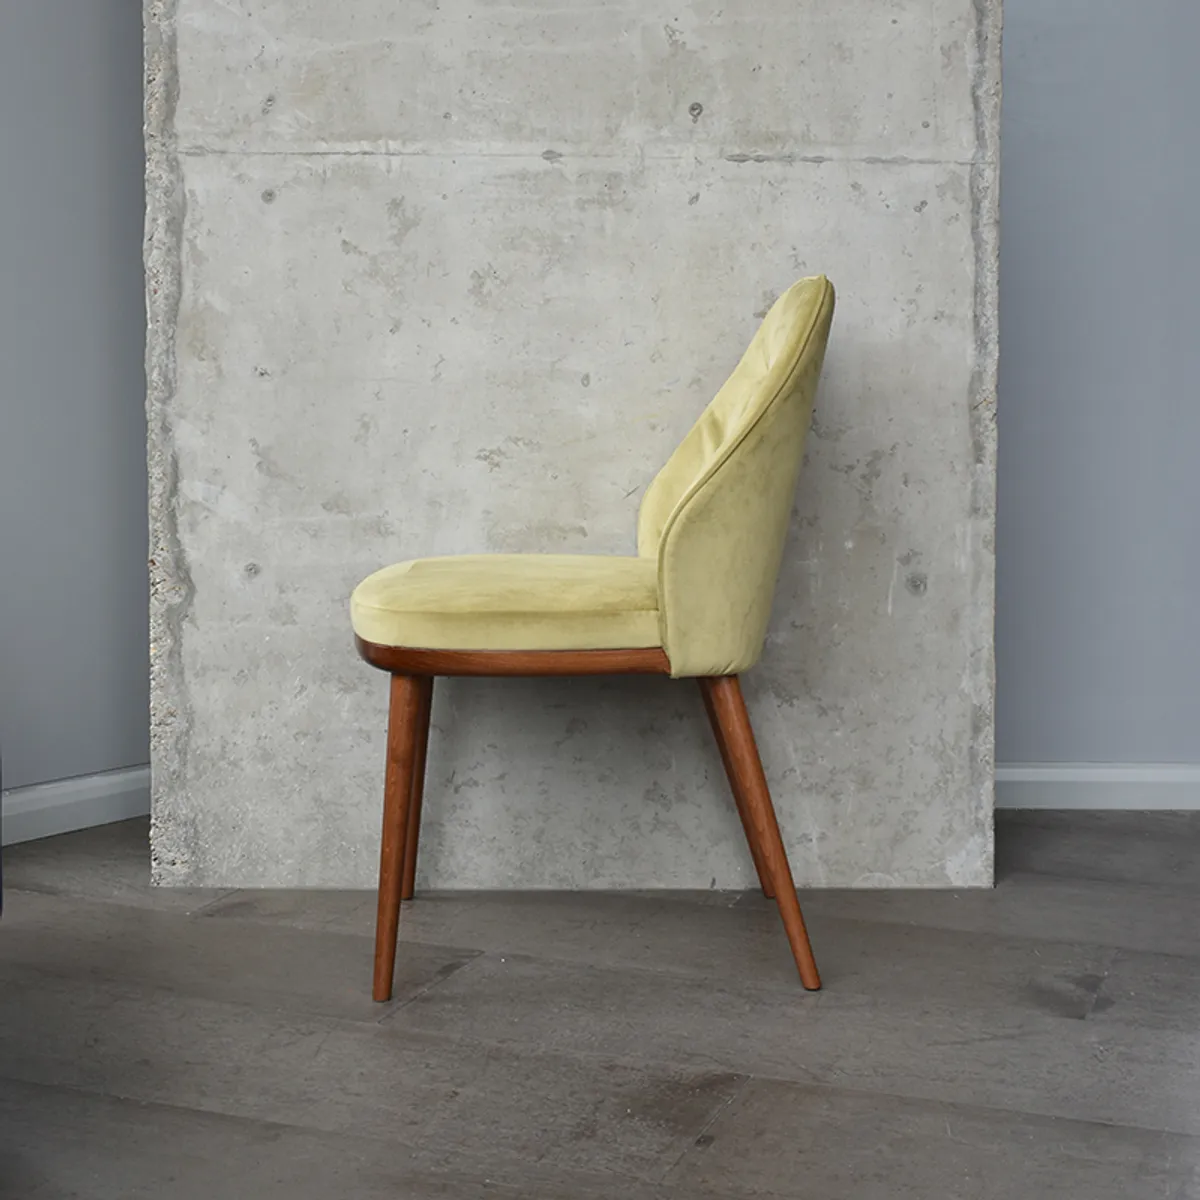 Cremant Side Chair New Furniture From Milan 2019 By Inside Out Contracts 010